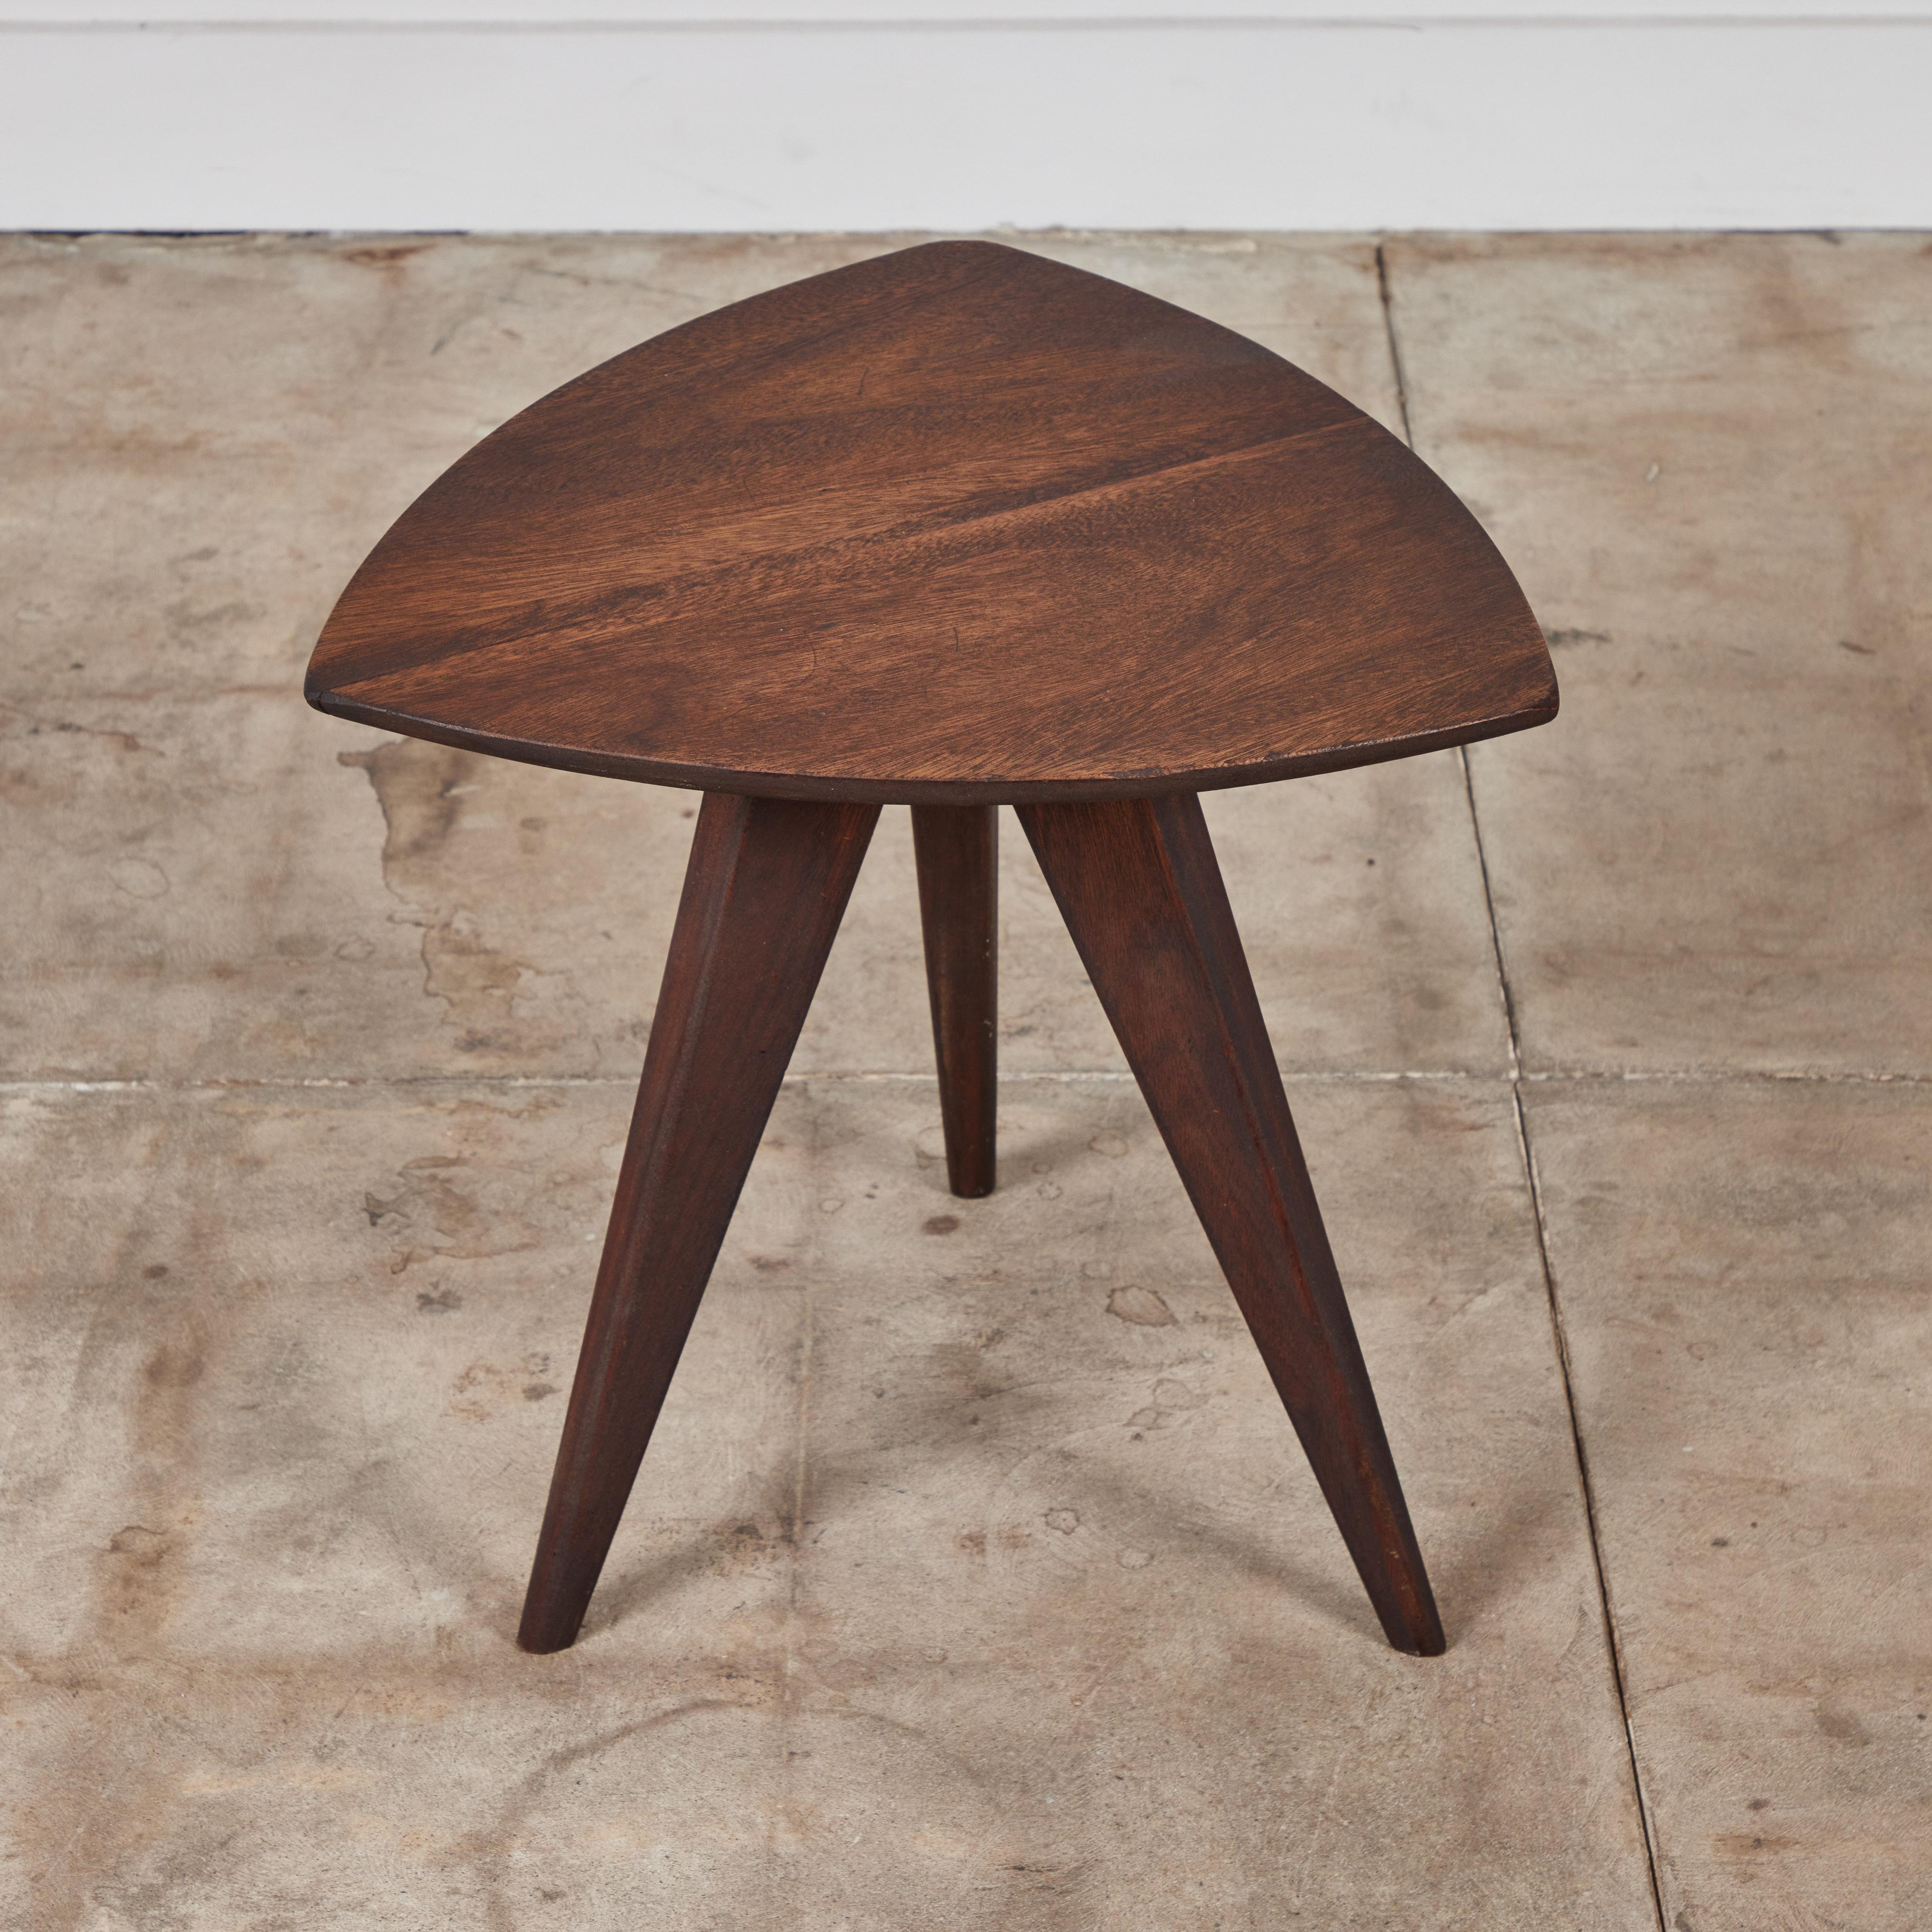 Paul Laszlo Triangular Mahogany Side Table for Glenn of California In Good Condition For Sale In Los Angeles, CA